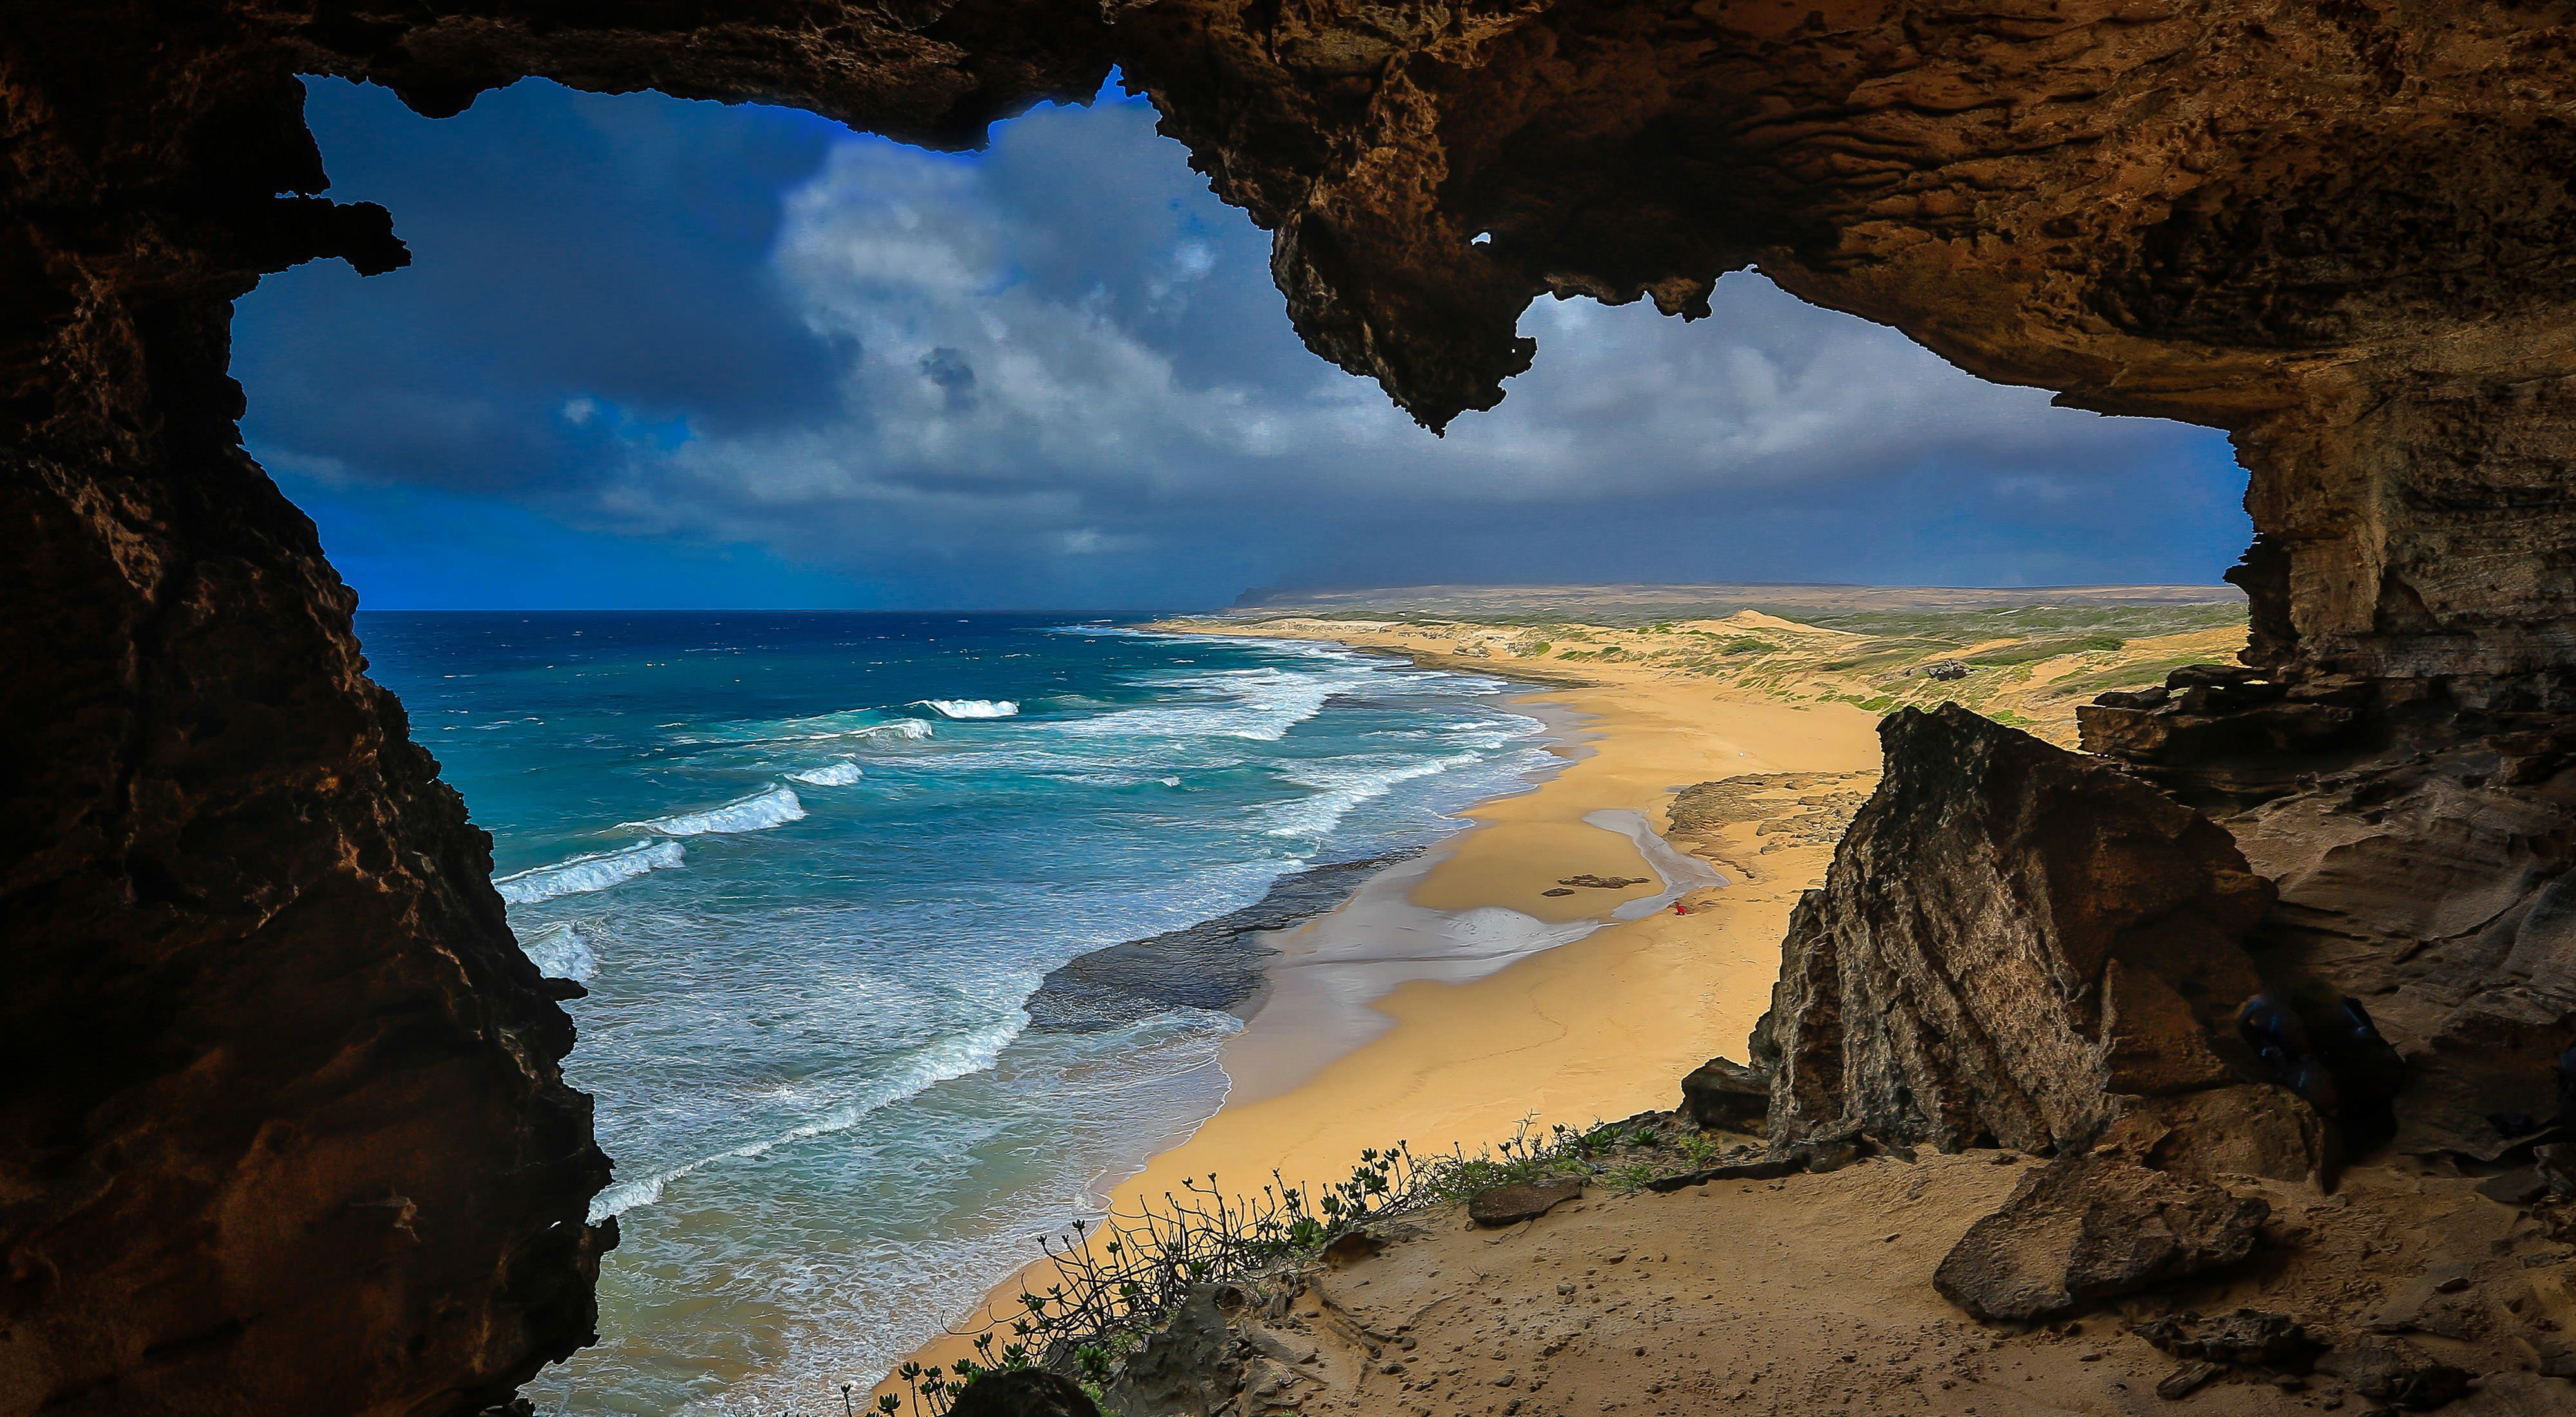 View of ocean waves meeting beach and shoreline from inside a cave.